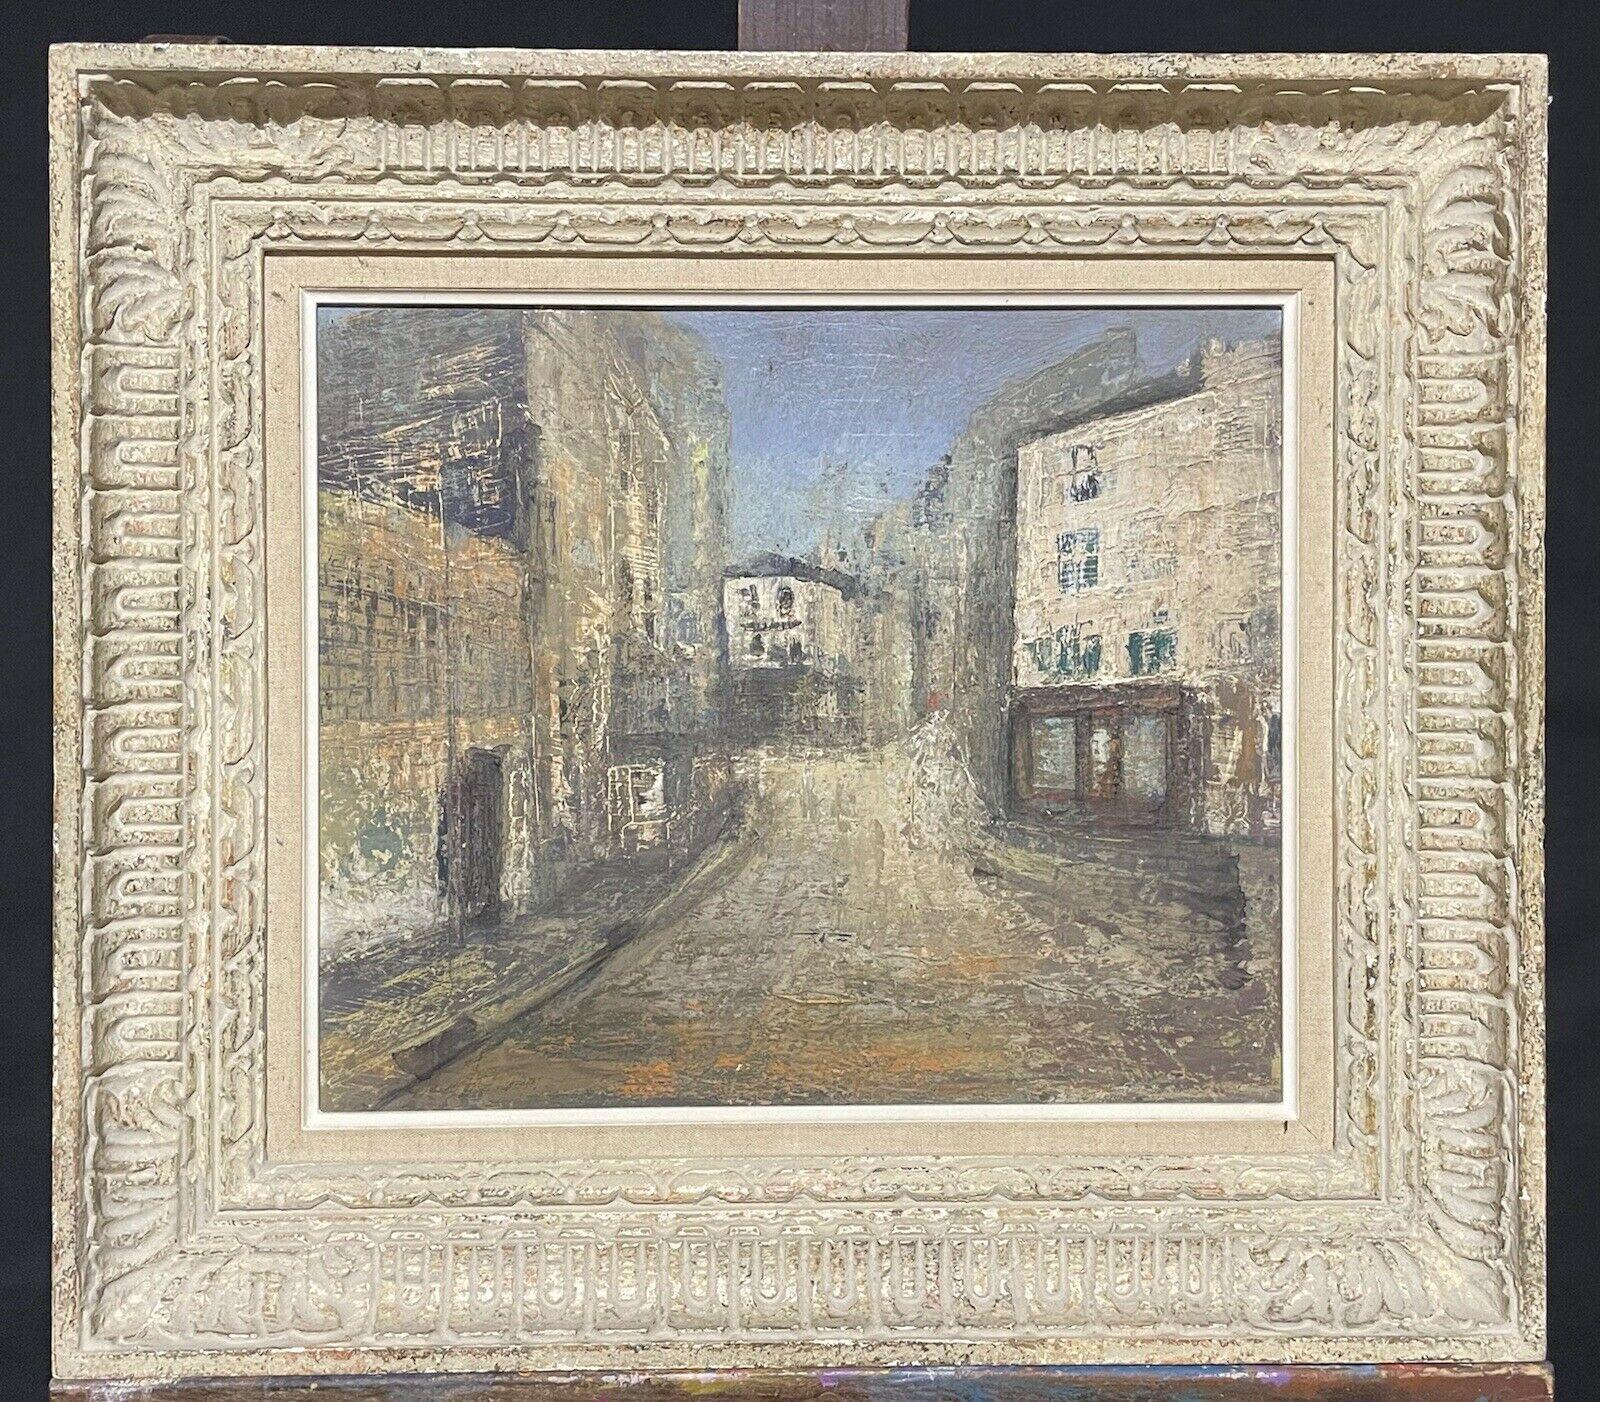 Claudine Riboulet Landscape Painting - 1950's FRENCH MODERNIST OIL PAINTING - CITY STREET SCENE - CARVED WOOD FRAME